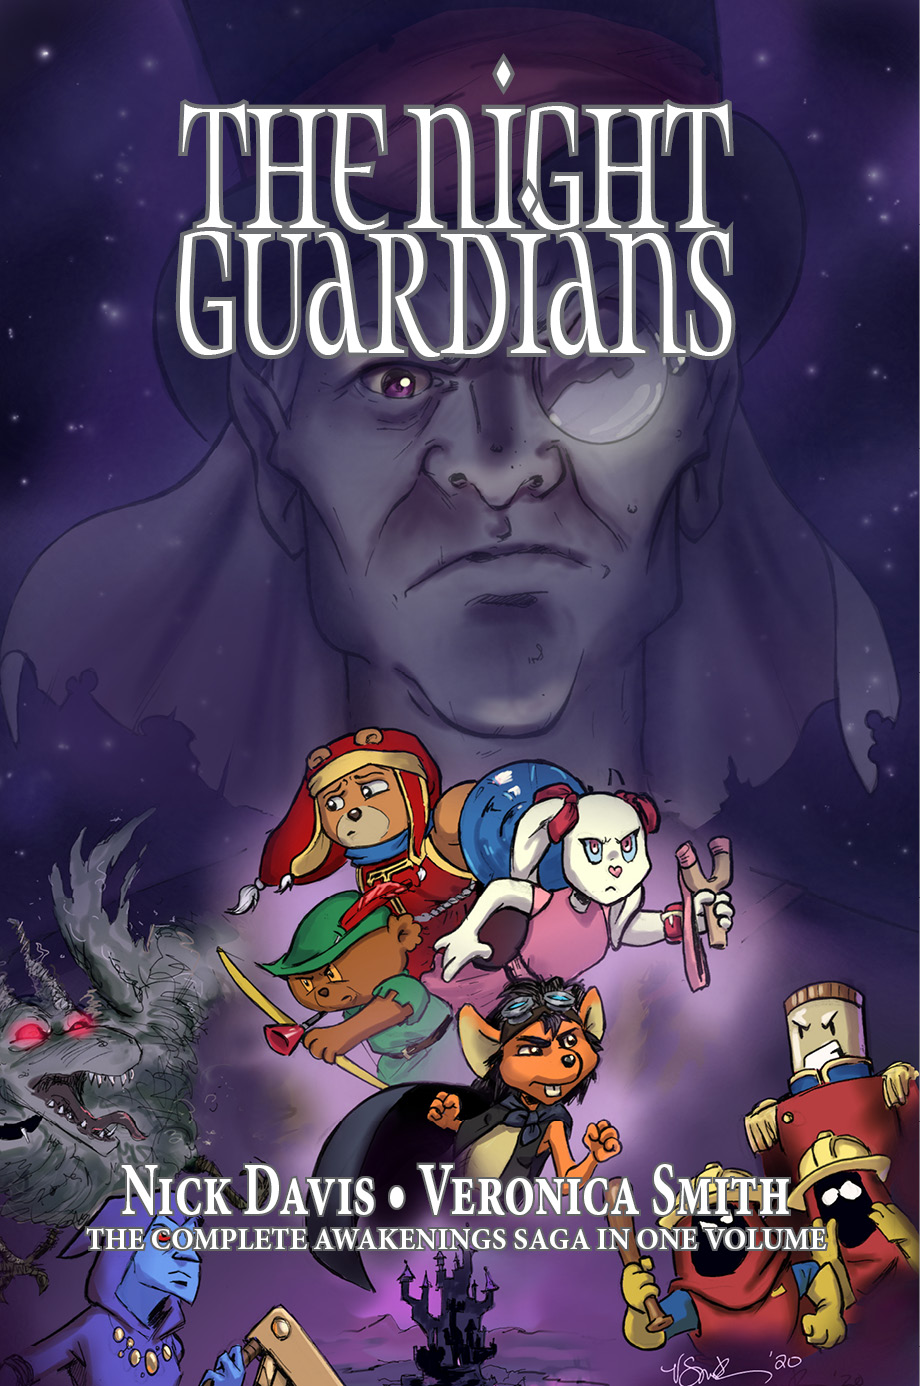 The Night Guardians, the adventure of a band of heroic cuddly toys who go on a quest into the Underbed to save their child from the Boogeyman.